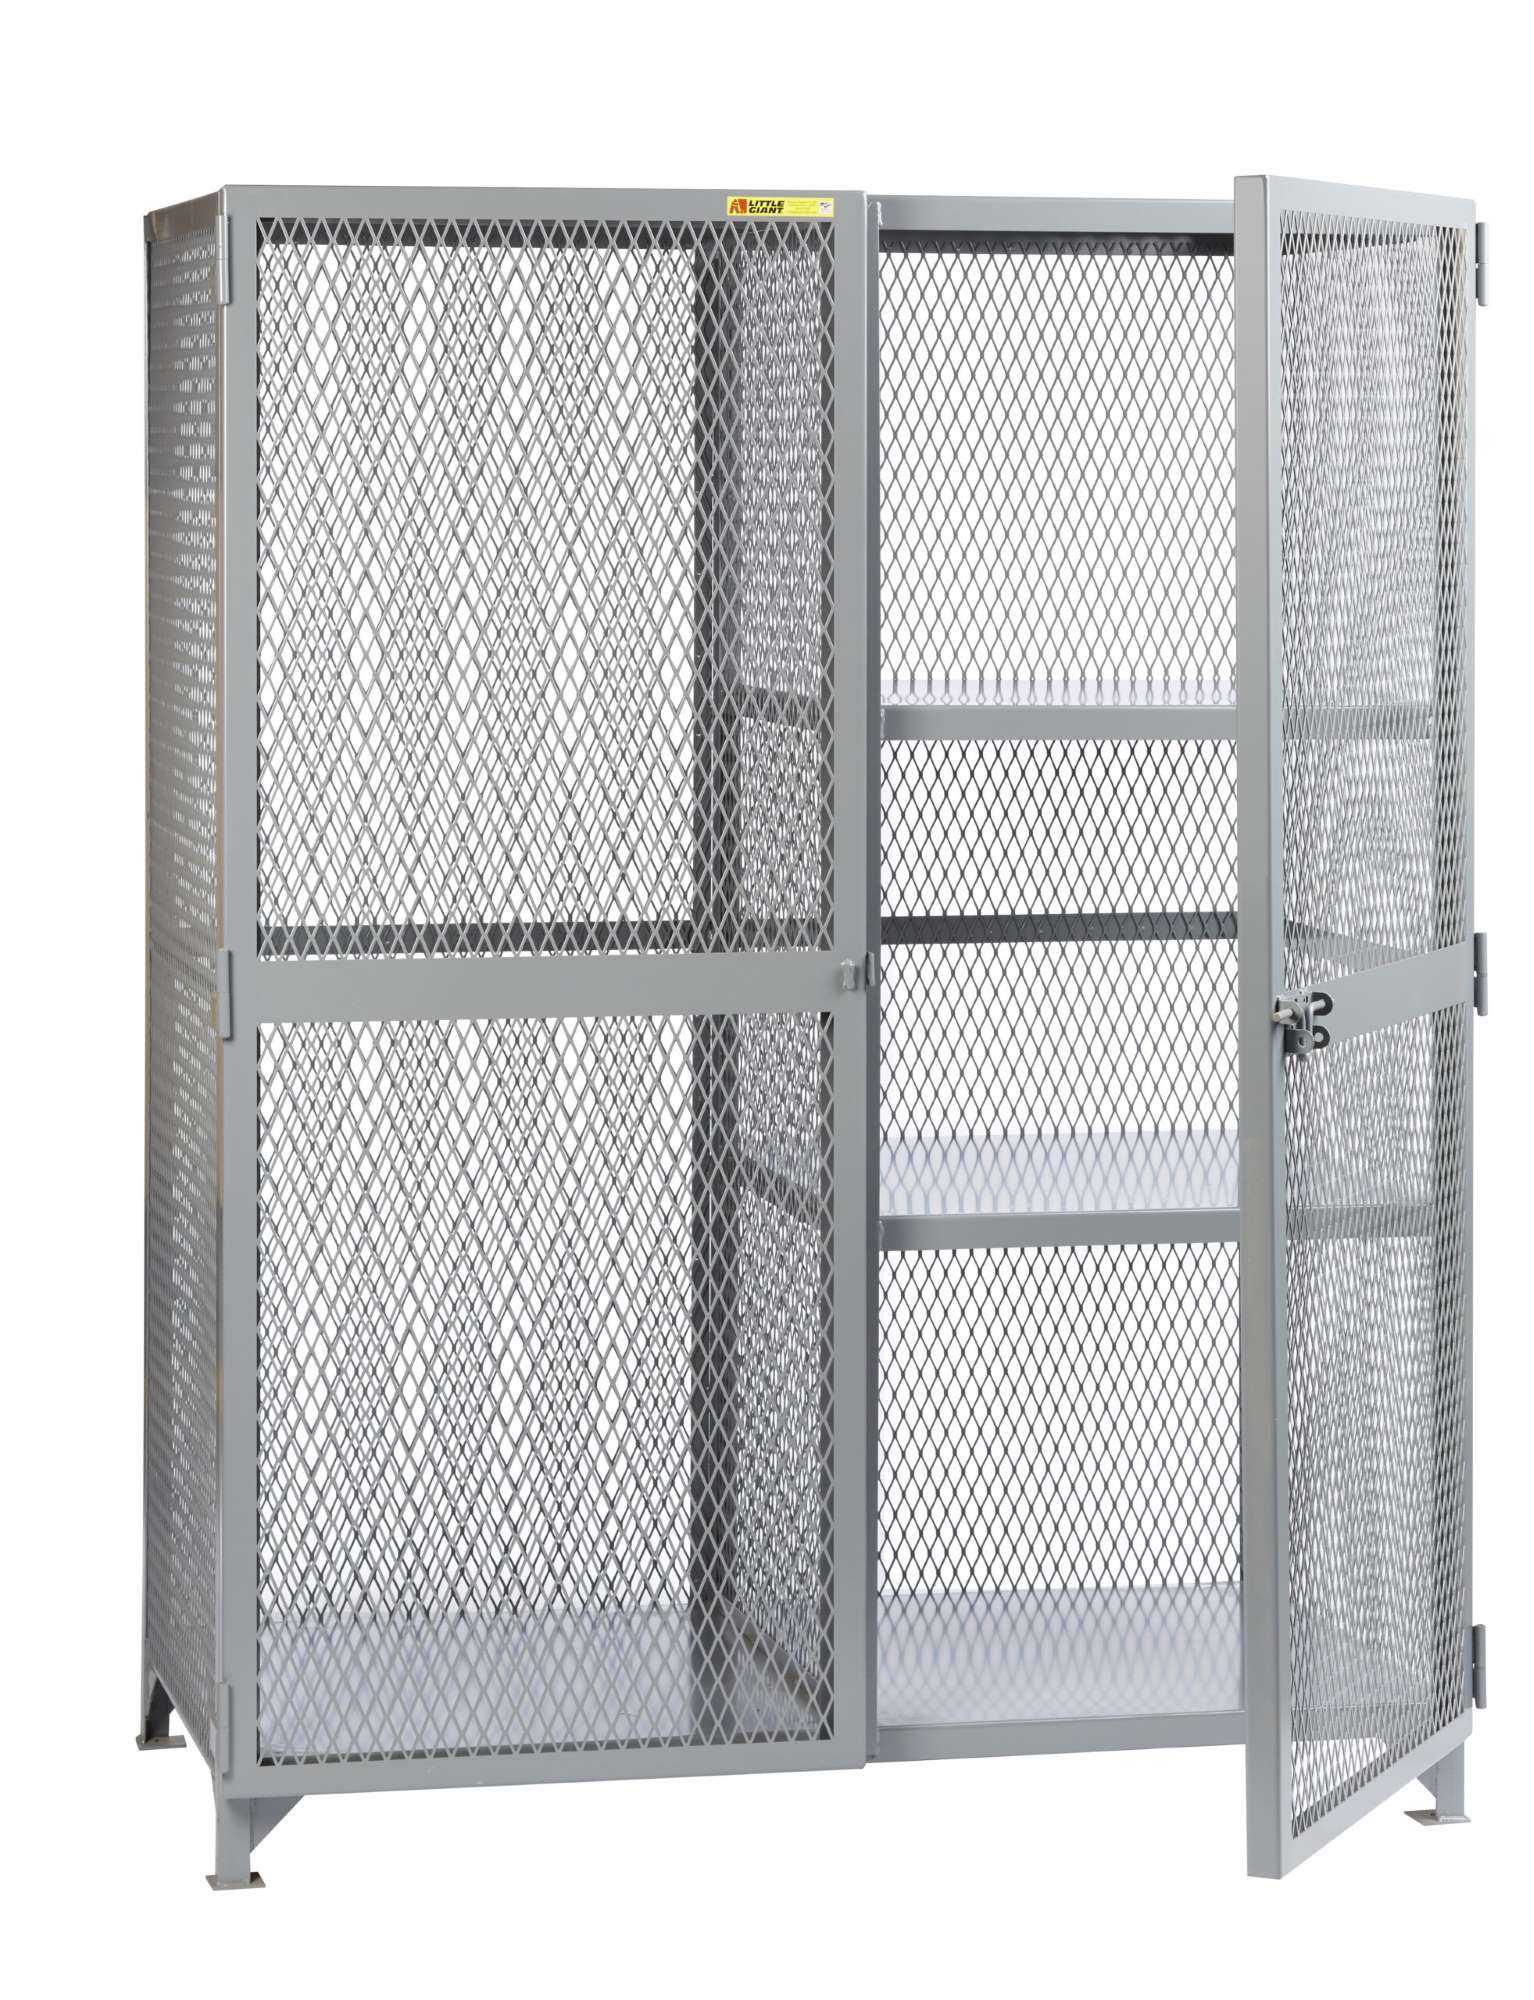 Little Giant combination cabinet with two half shelves, Padlockable double doors, Overall height 78"